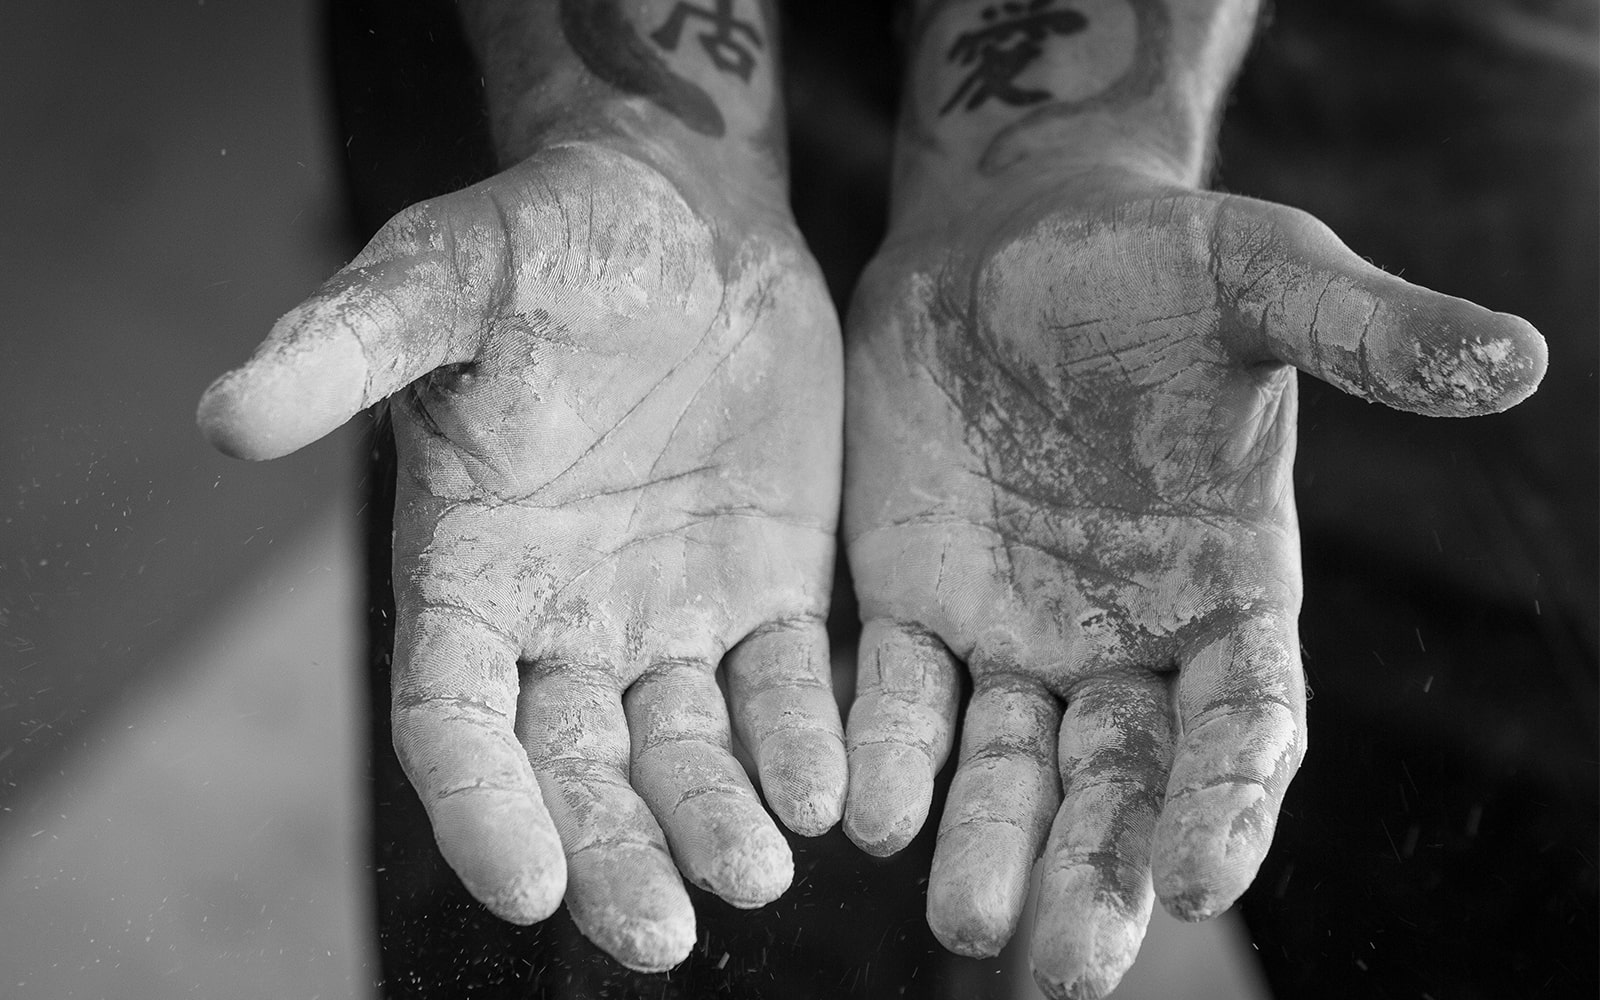 Rough hands chalked for rock climbing